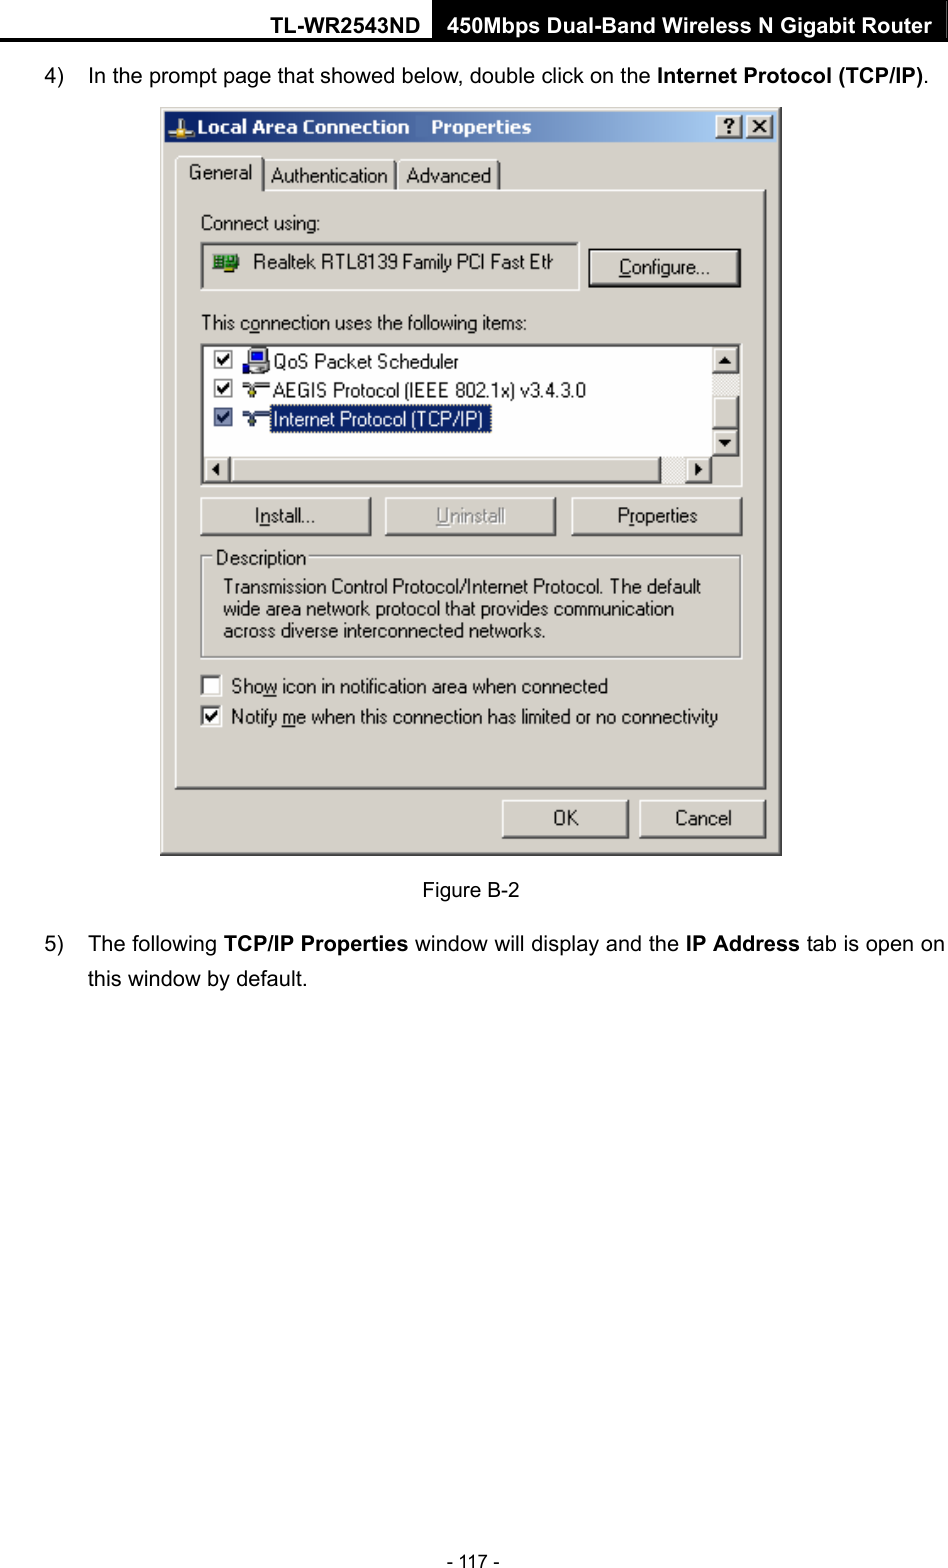 TL-WR2543ND 450Mbps Dual-Band Wireless N Gigabit Router - 117 - 4)  In the prompt page that showed below, double click on the Internet Protocol (TCP/IP).  Figure B-2 5) The following TCP/IP Properties window will display and the IP Address tab is open on this window by default. 